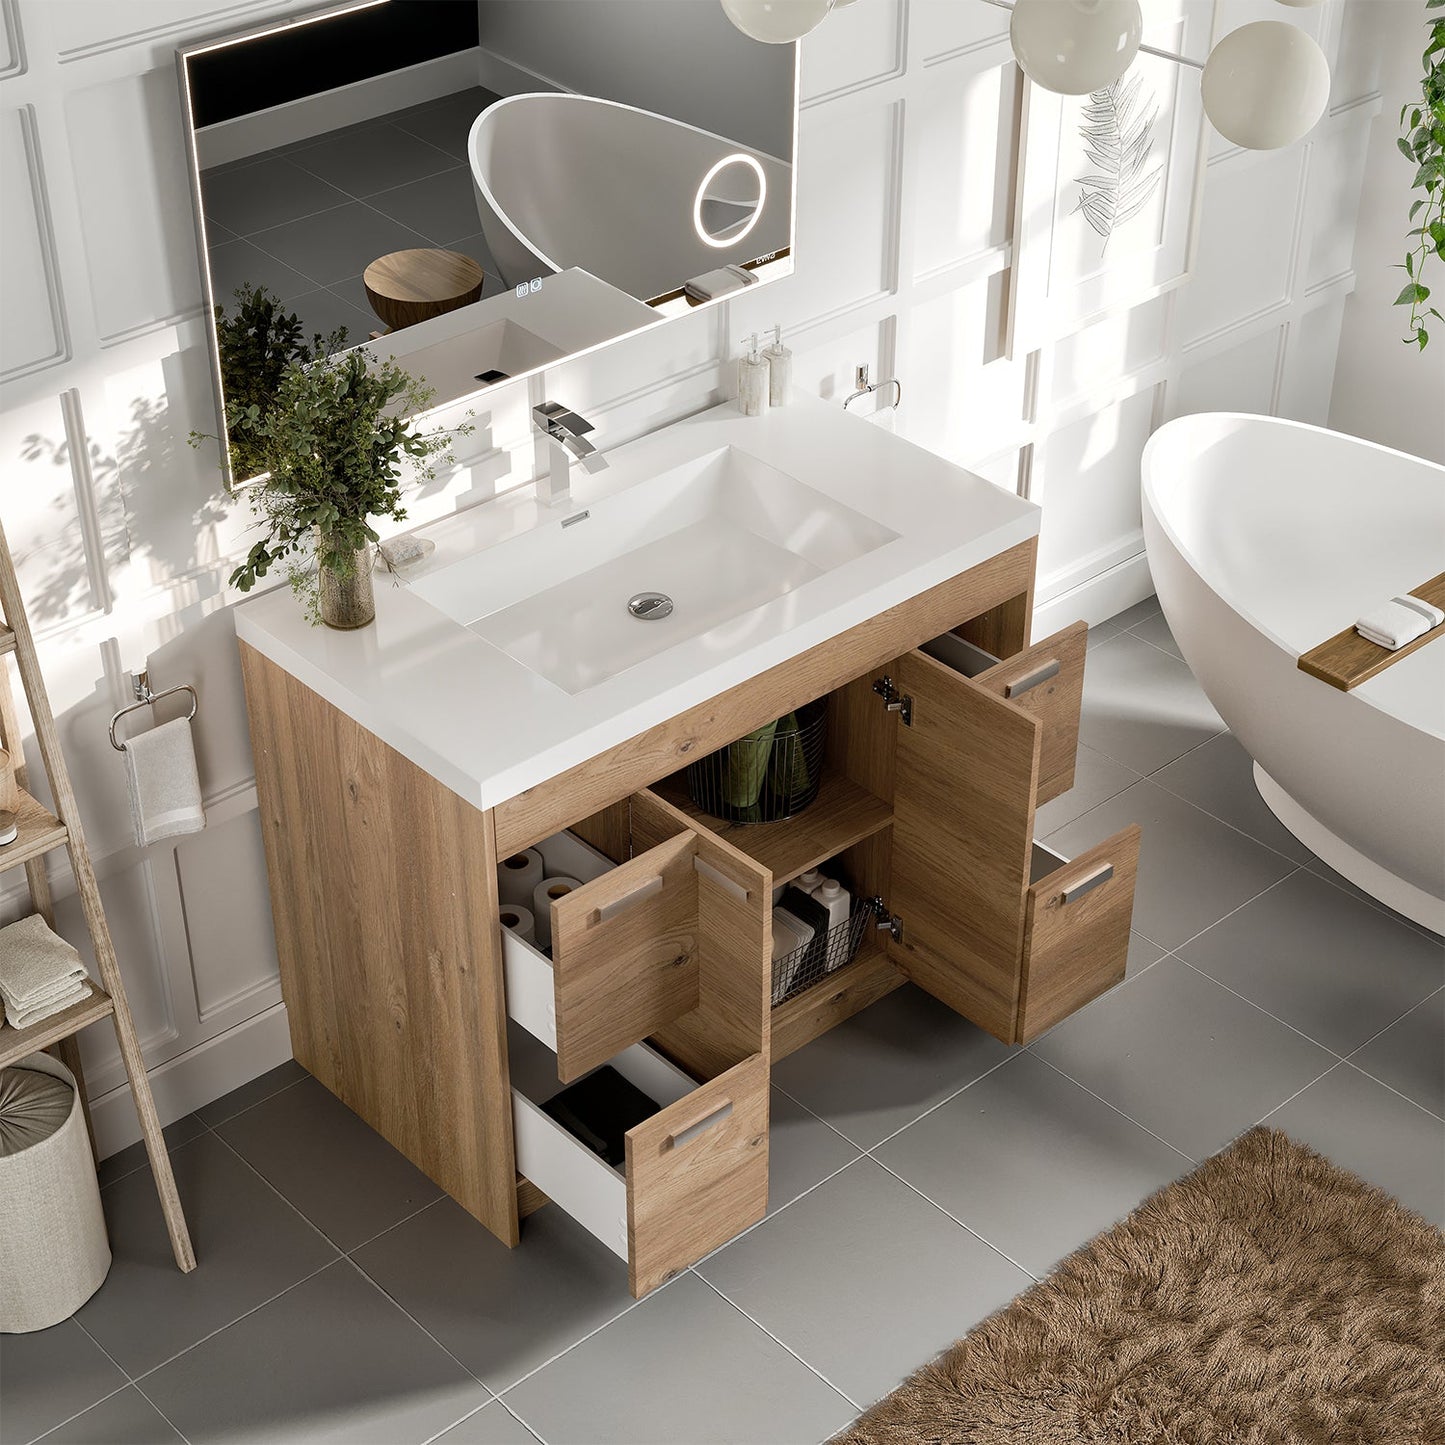 Lugano 42"W x 20" D Natural Oak Bathroom Vanity with Acrylic Countertop and Integrated Sink